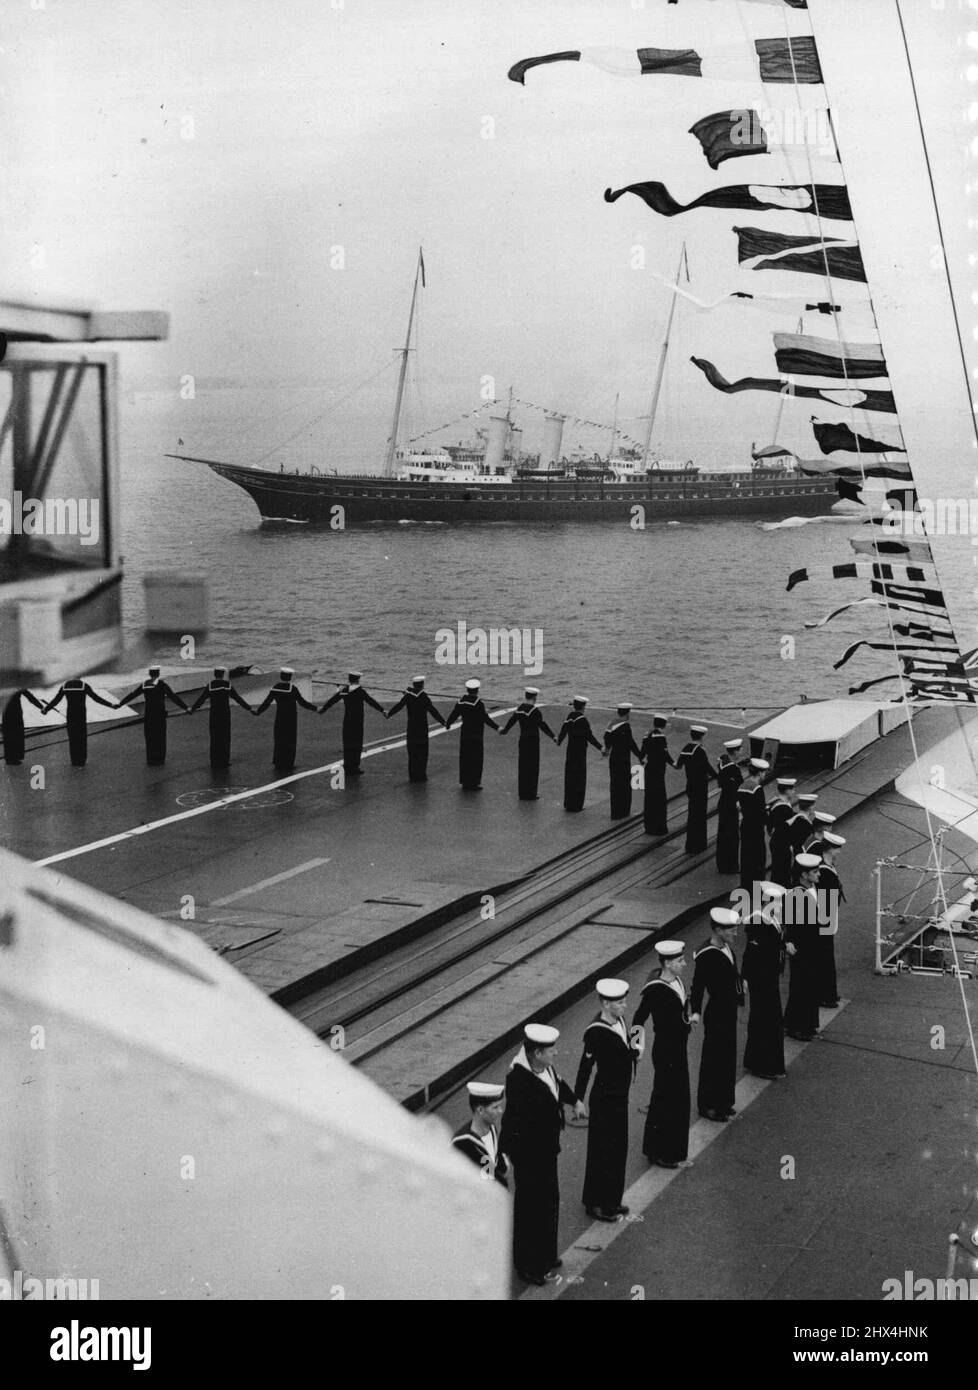 The King Reviews His Fleet At Spithead - The Royal yacht 'Victoria and Albert', passing the aircraft-carrier 'Glorious' as the crew dressed ship. Aboard the Royal yacht 'Victoria and Albert, the King passed through the five-mile lines of 160 warships and merchant vessels when he made his Coronation Review of the British Navy and Mercantile Marine at Spithead. Nearly 300 ships, including 17 from foreign fleets, were reviewed. May 20, 1937. Stock Photo